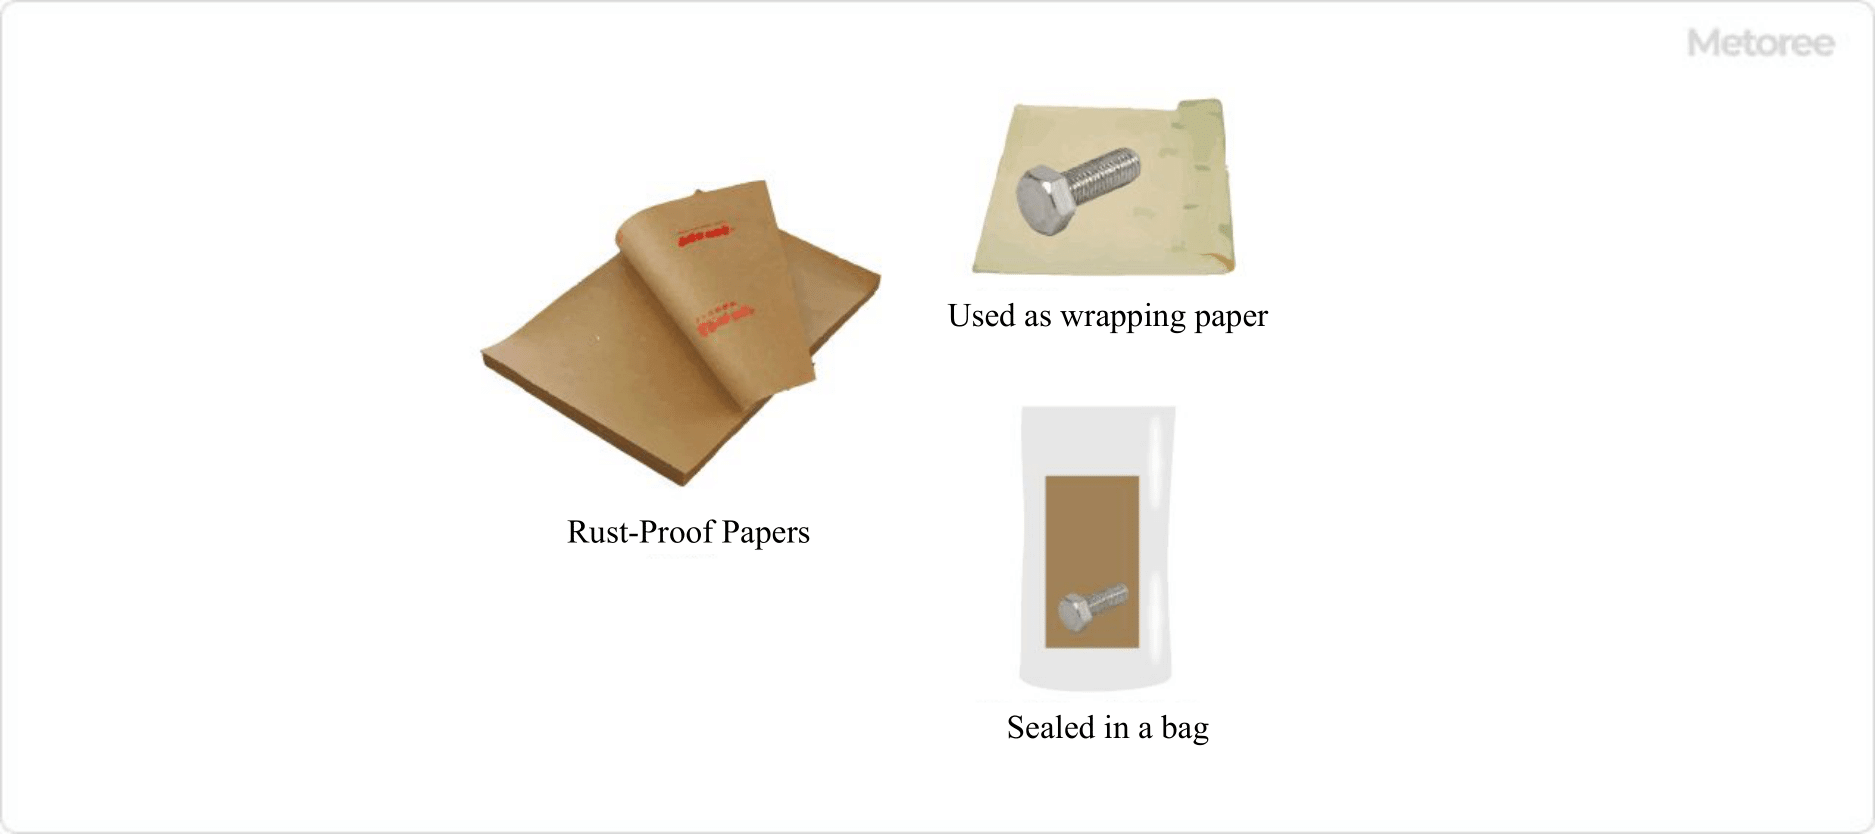 3487_Rust-Proof-Papers_防錆紙_-1.png